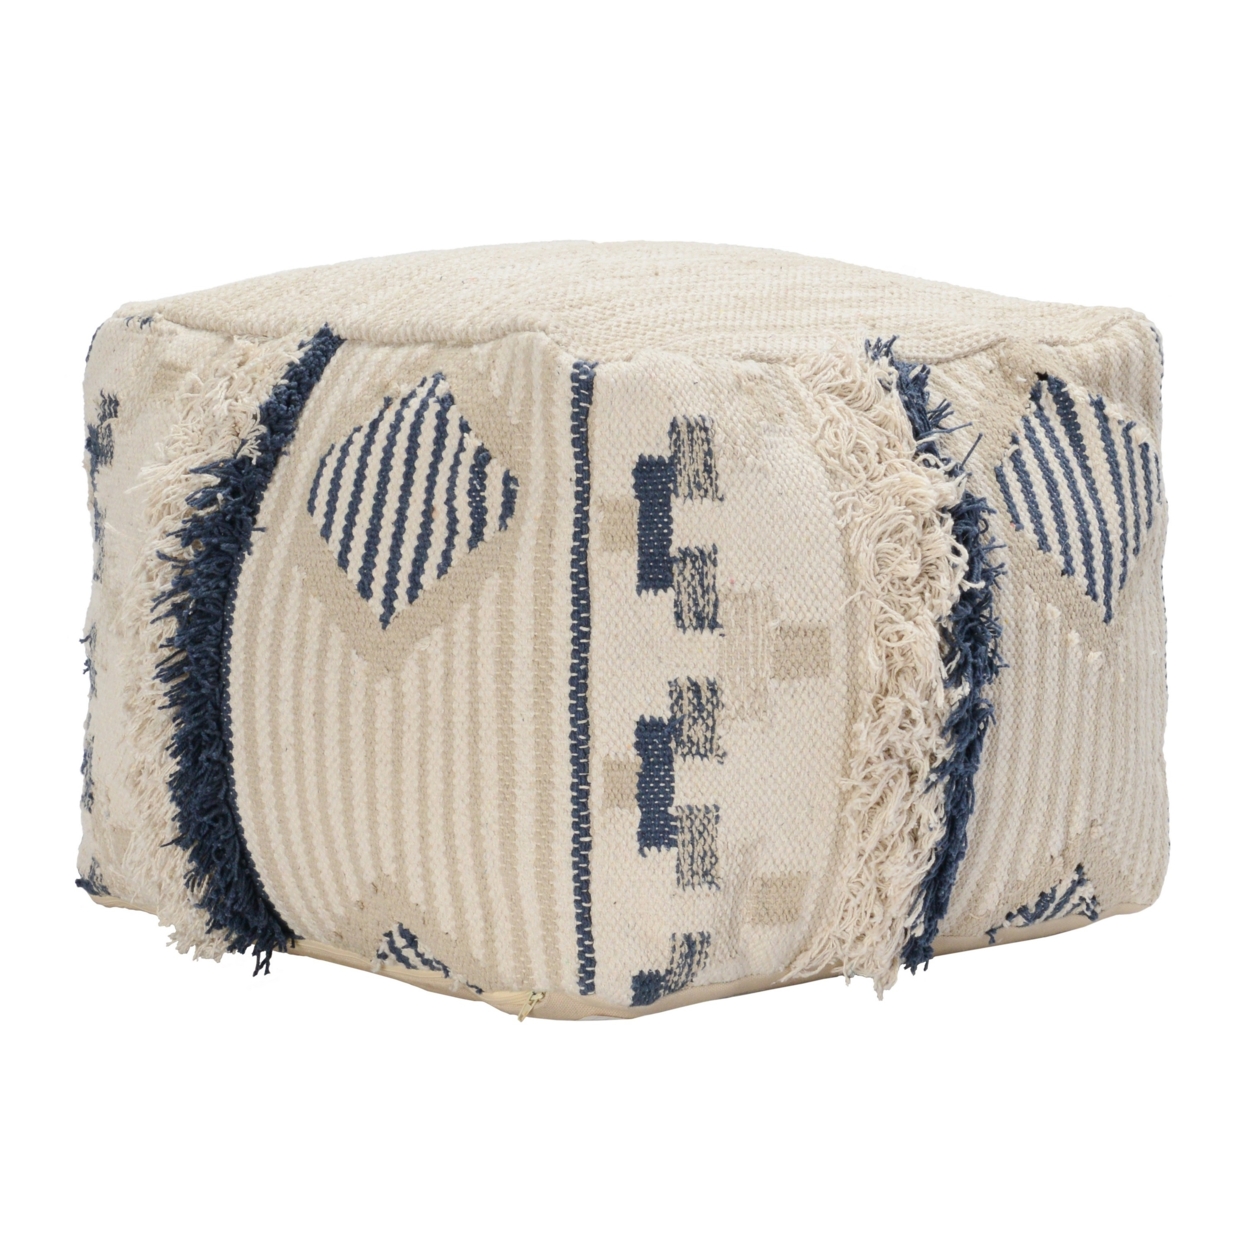 Fabric Pouf Ottoman With Woven Design And Fringe Details, Cream And Blue- Saltoro Sherpi